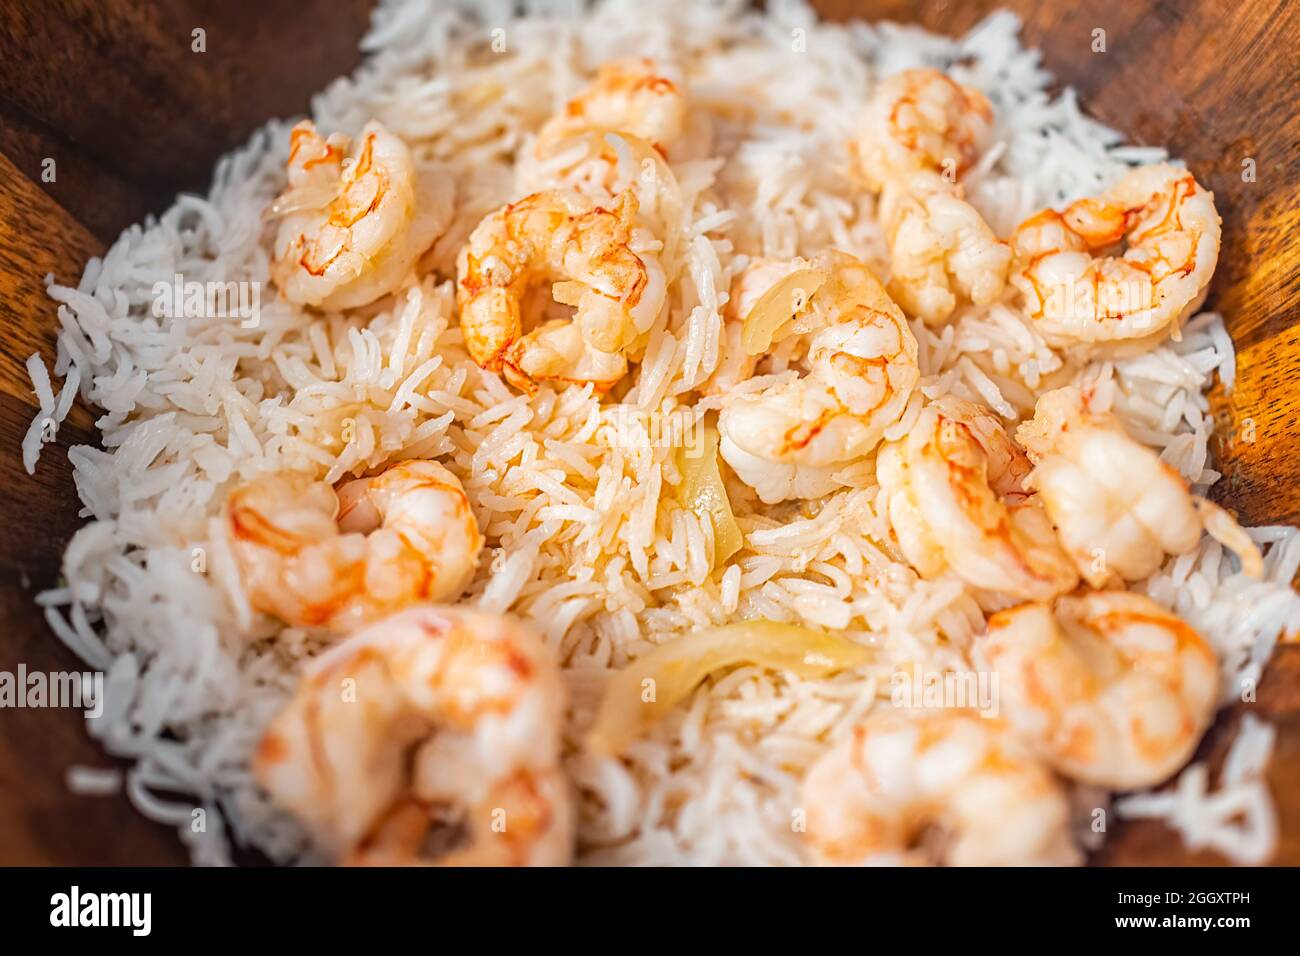 Macro closeup of homemade basmati rice, cooked whole large king jumbo Argentinian fried shrimp seafood with sweet onion slices on wooden plate Stock Photo